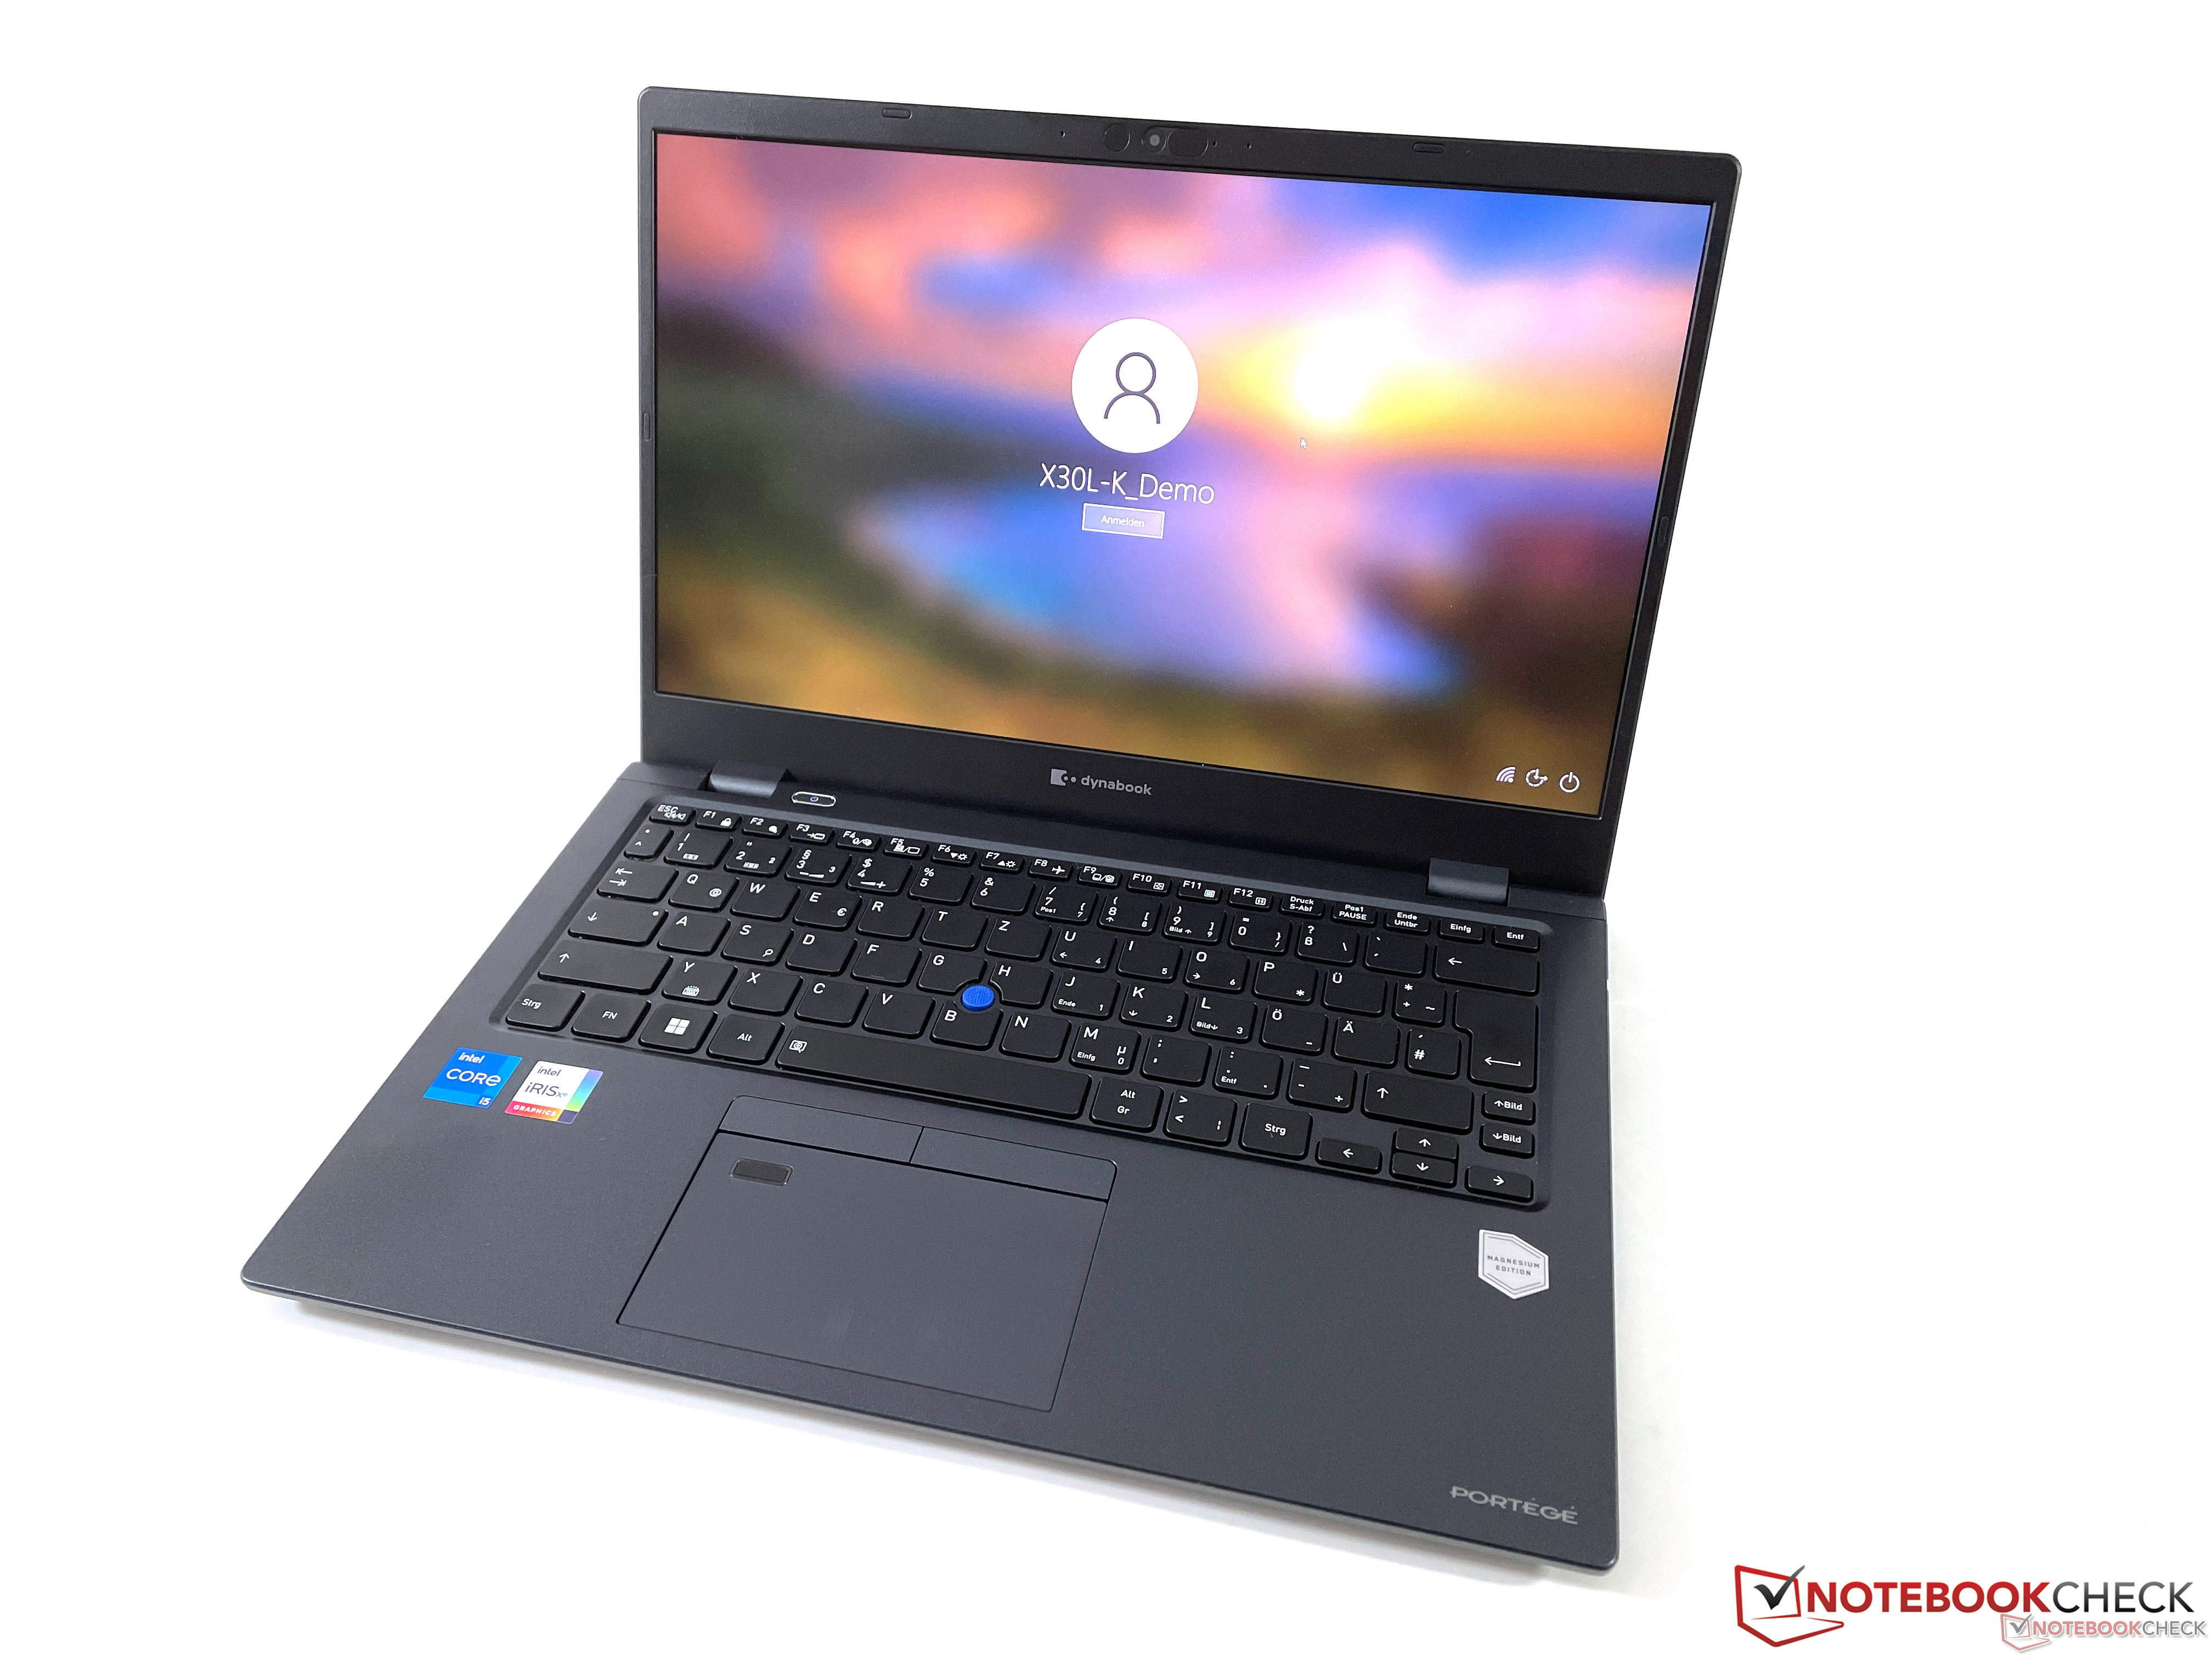 Dynabook Portege X30l K 139 Review Business Laptop Weighs Only 900 Grams Notebookcheck Net Reviews